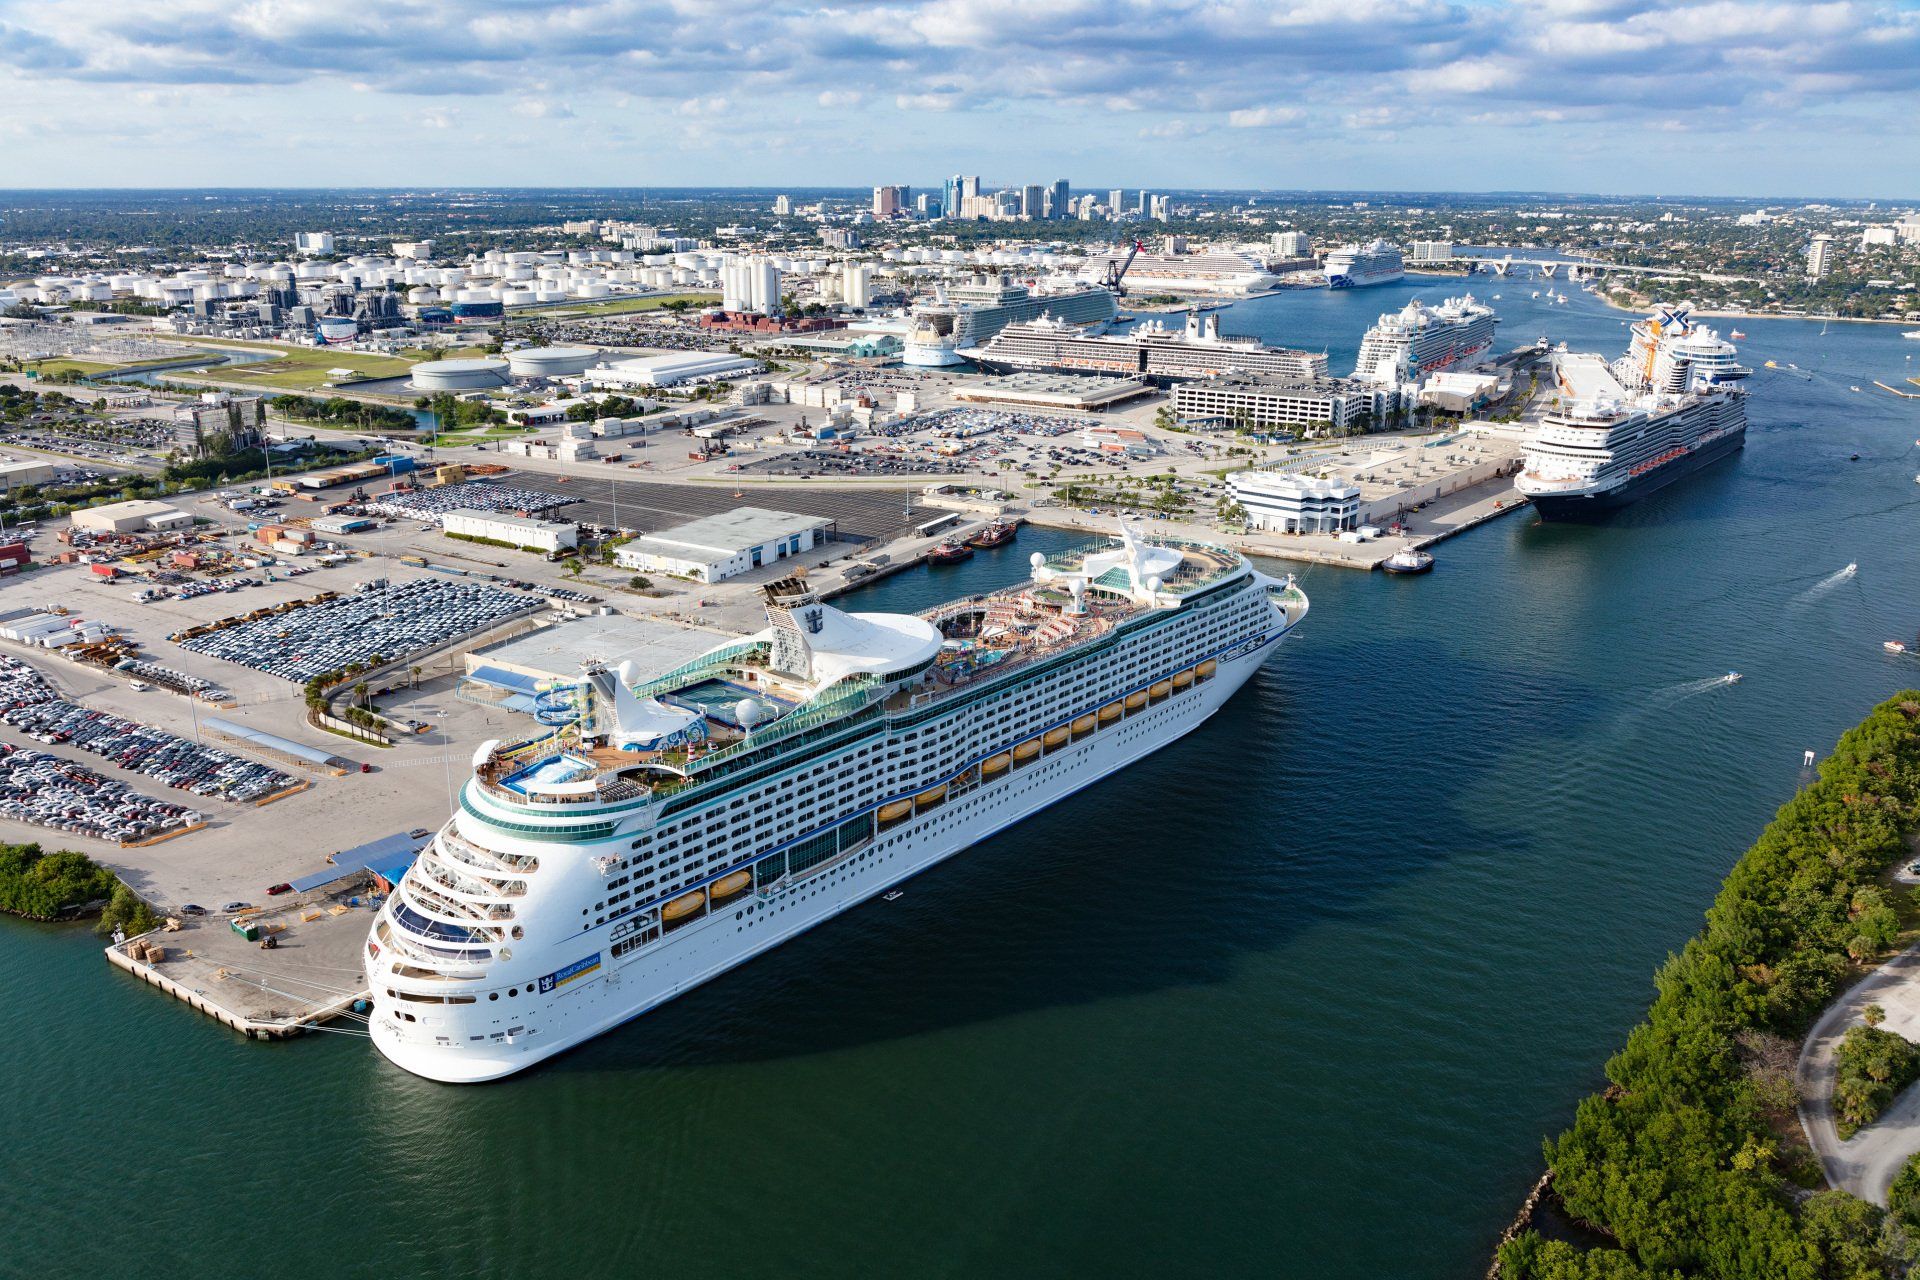 Most passengers sailed in and out in a single day: world record set by Port Everglades